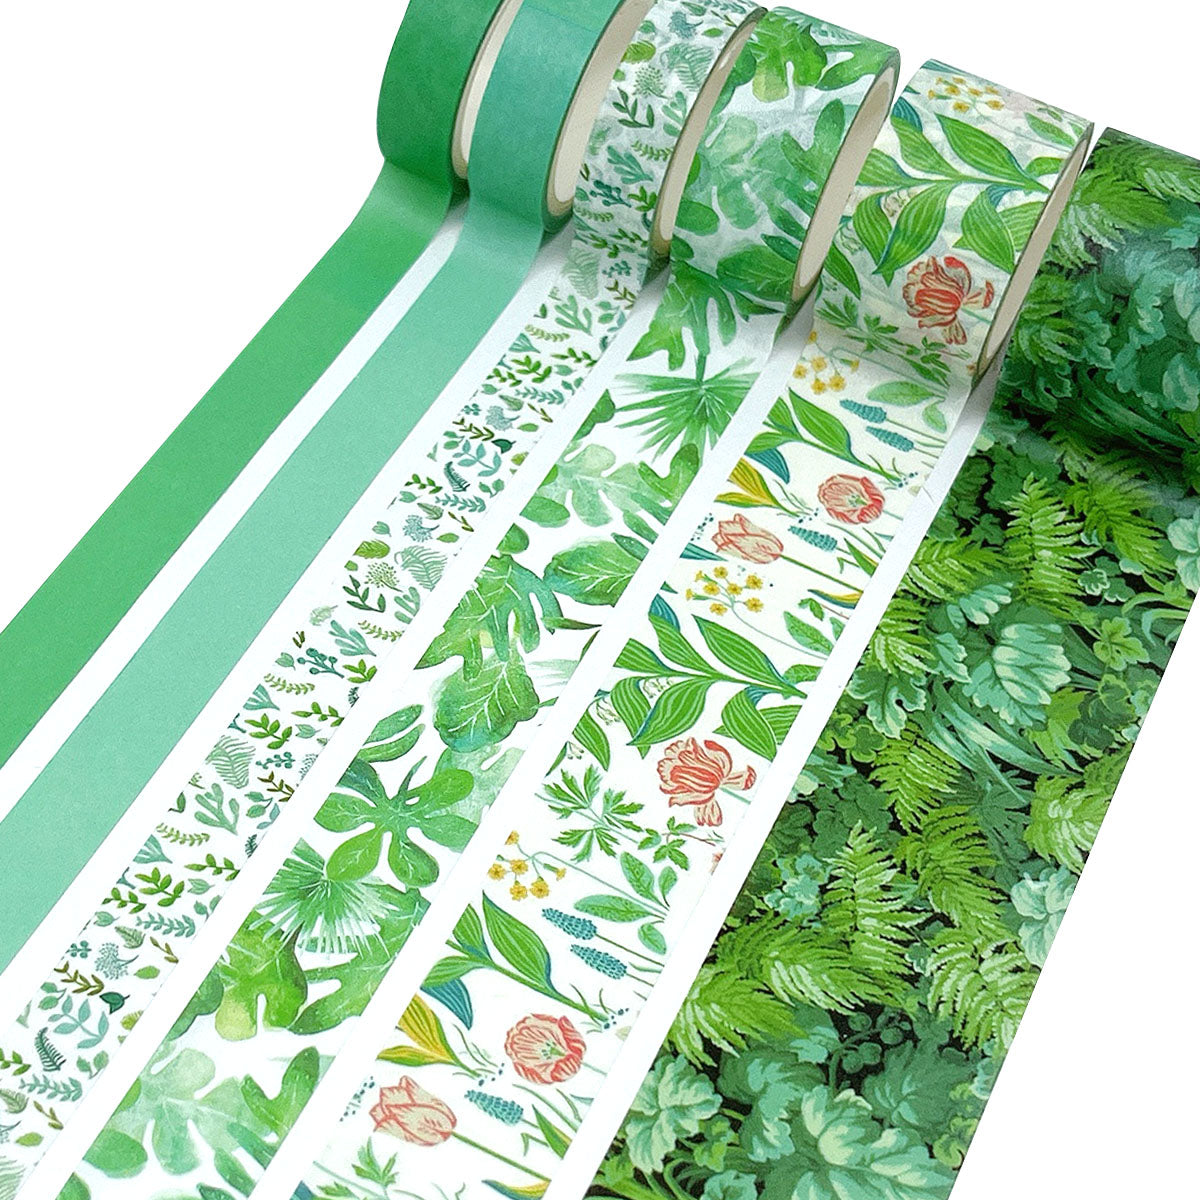 12 Rolls Green Washi Tape Set Leaves Floral Washi Masking Tape Colorful  Decorative Painters Tape For Scrapbook Gift Wrapping - AliExpress